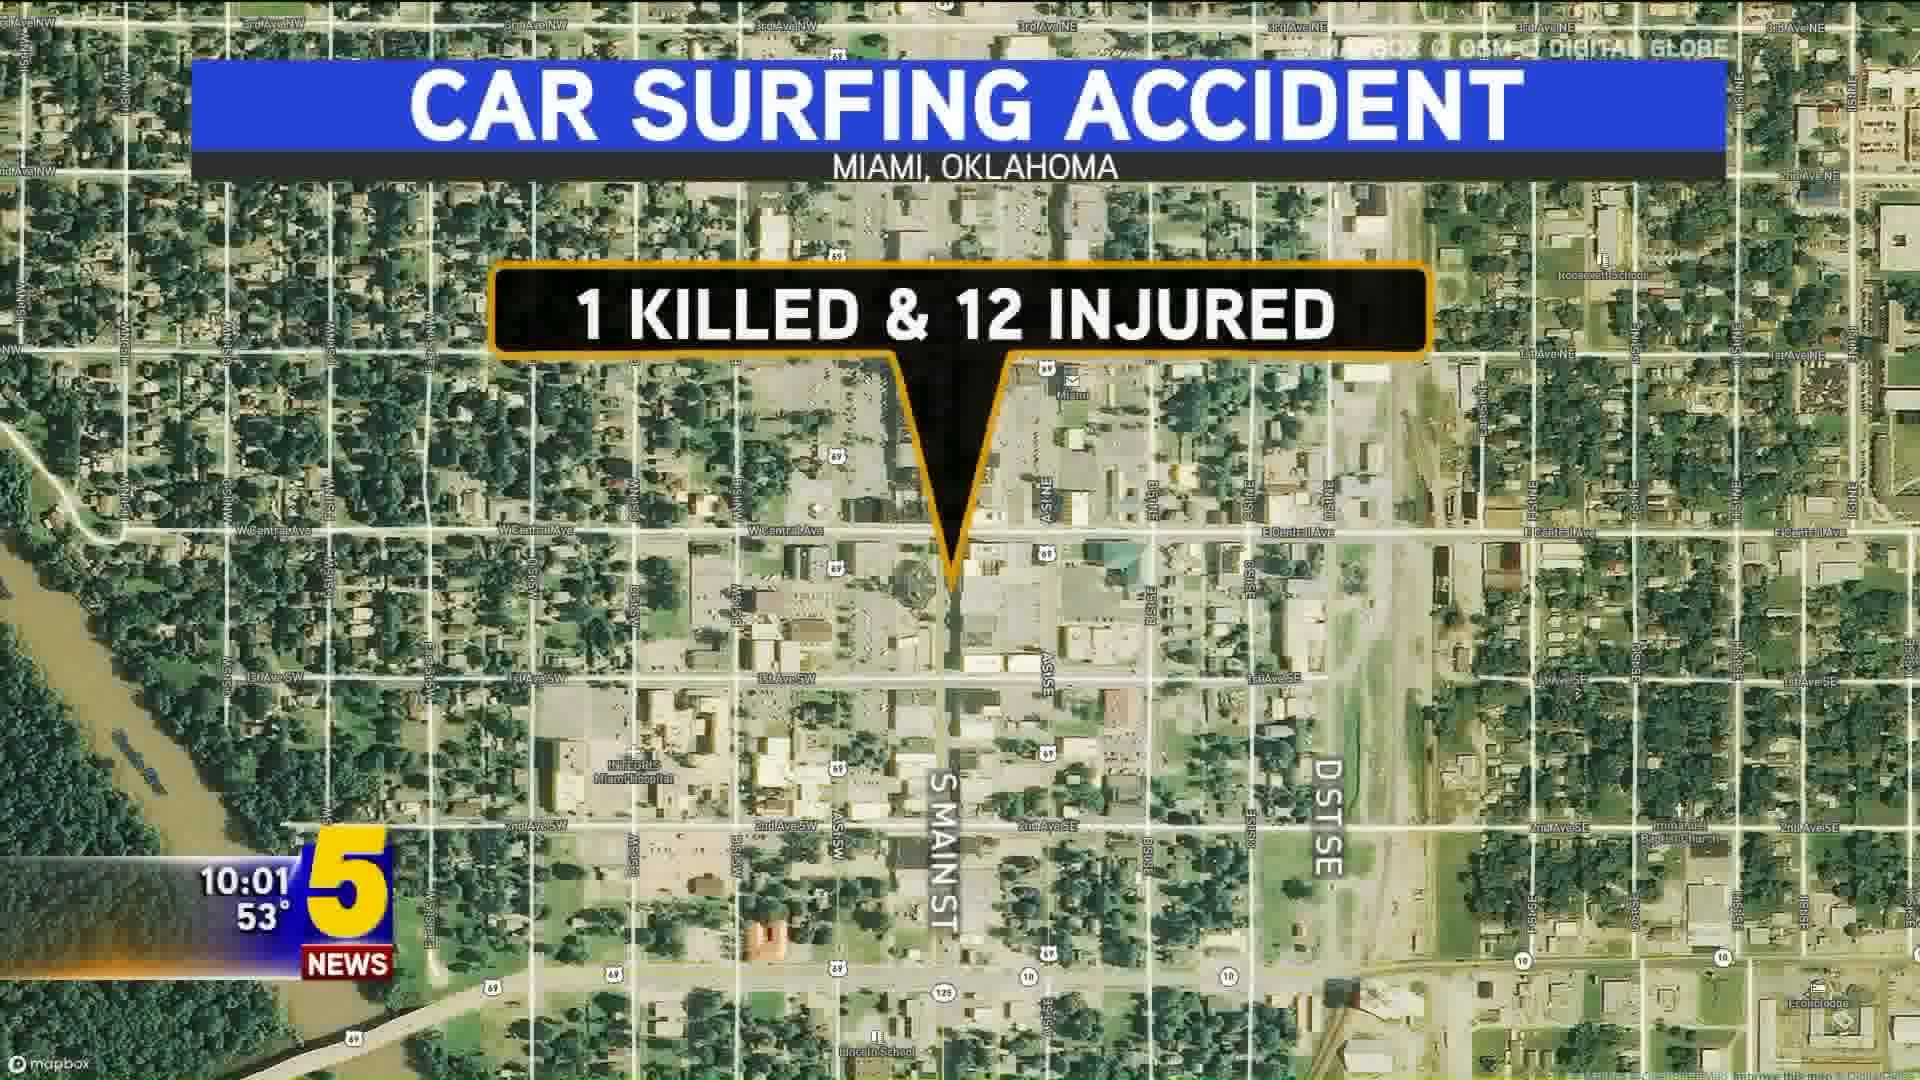 Car Surfing Accident